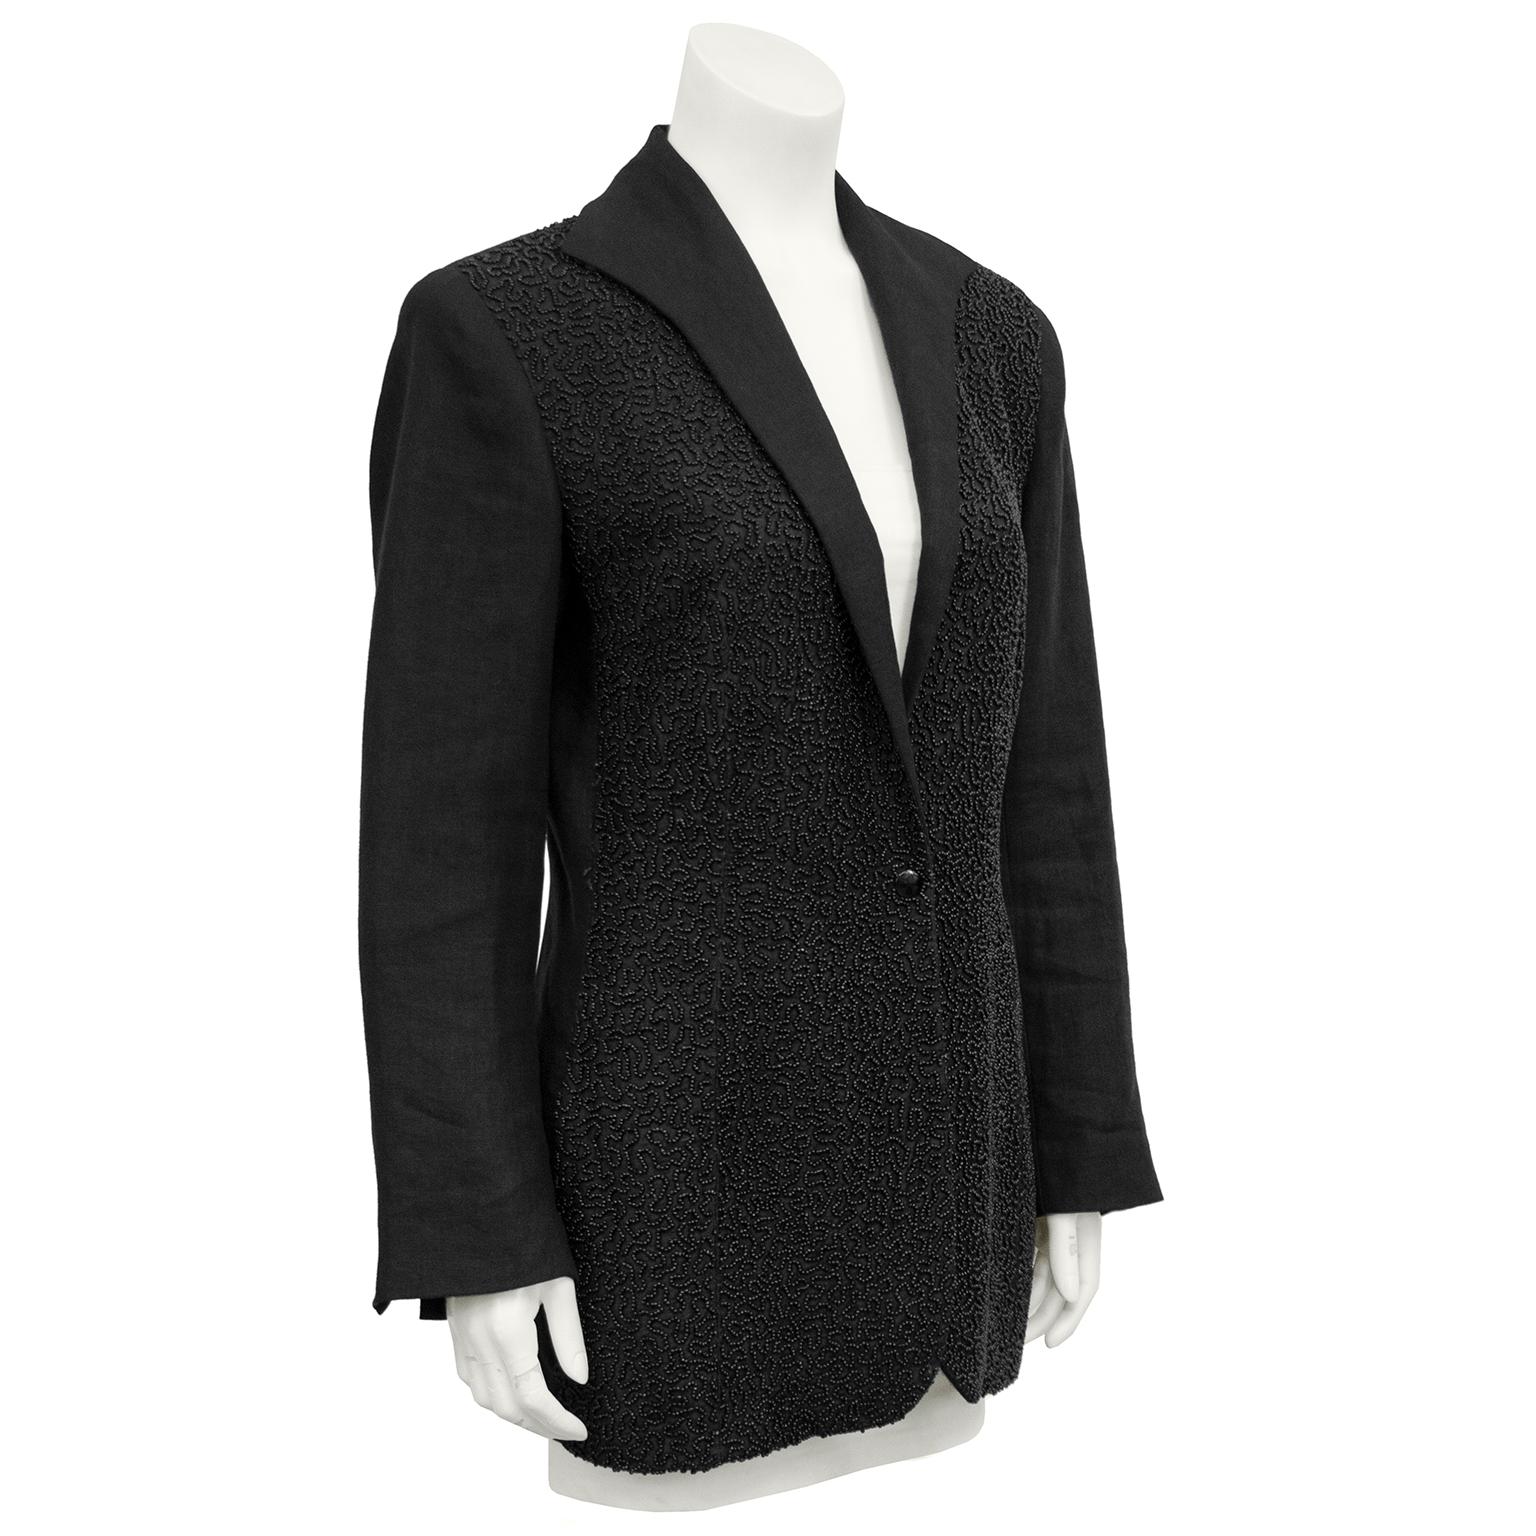 1990s Jean Paul Gaultier black linen blazer. Front entirely embellished in tiny metallic grey beadings in an allover design. Single front black button. Elongated, curved lapel. Five matching black buttons at cuffs. Blazer is equestrian style,